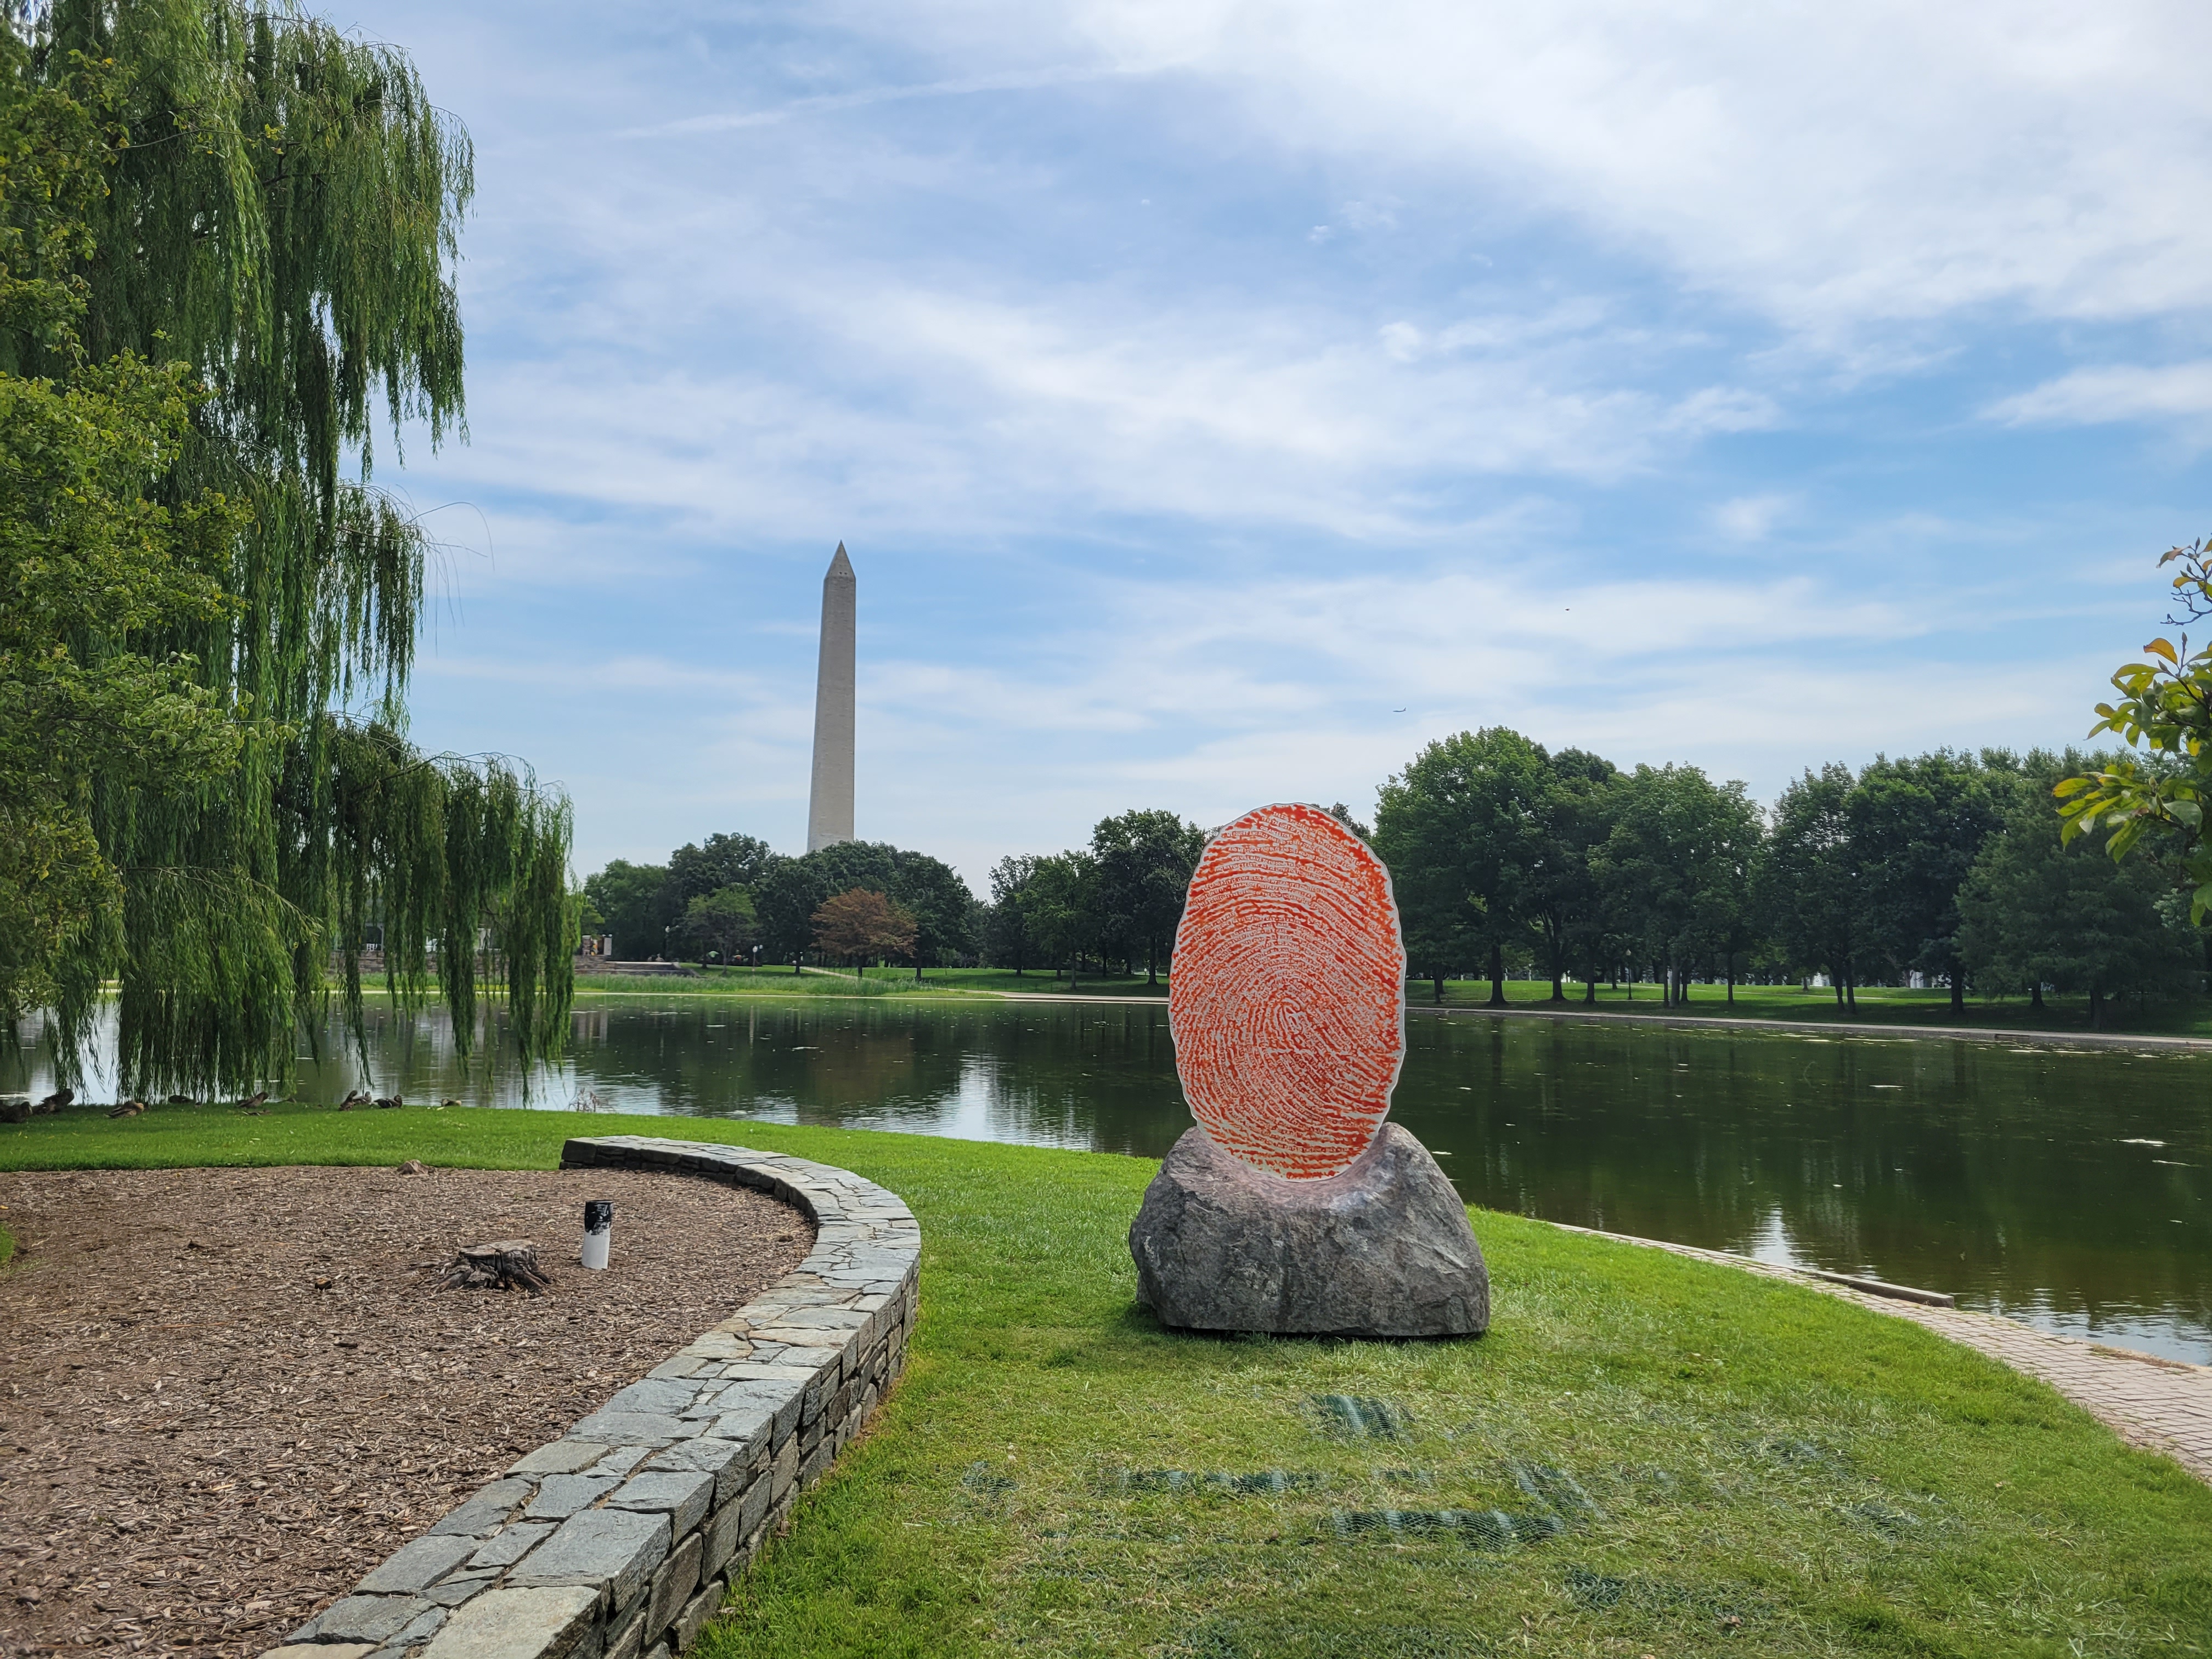 A view of a giant red and white fingerprint in the foreground and the Washington Monument in the background.